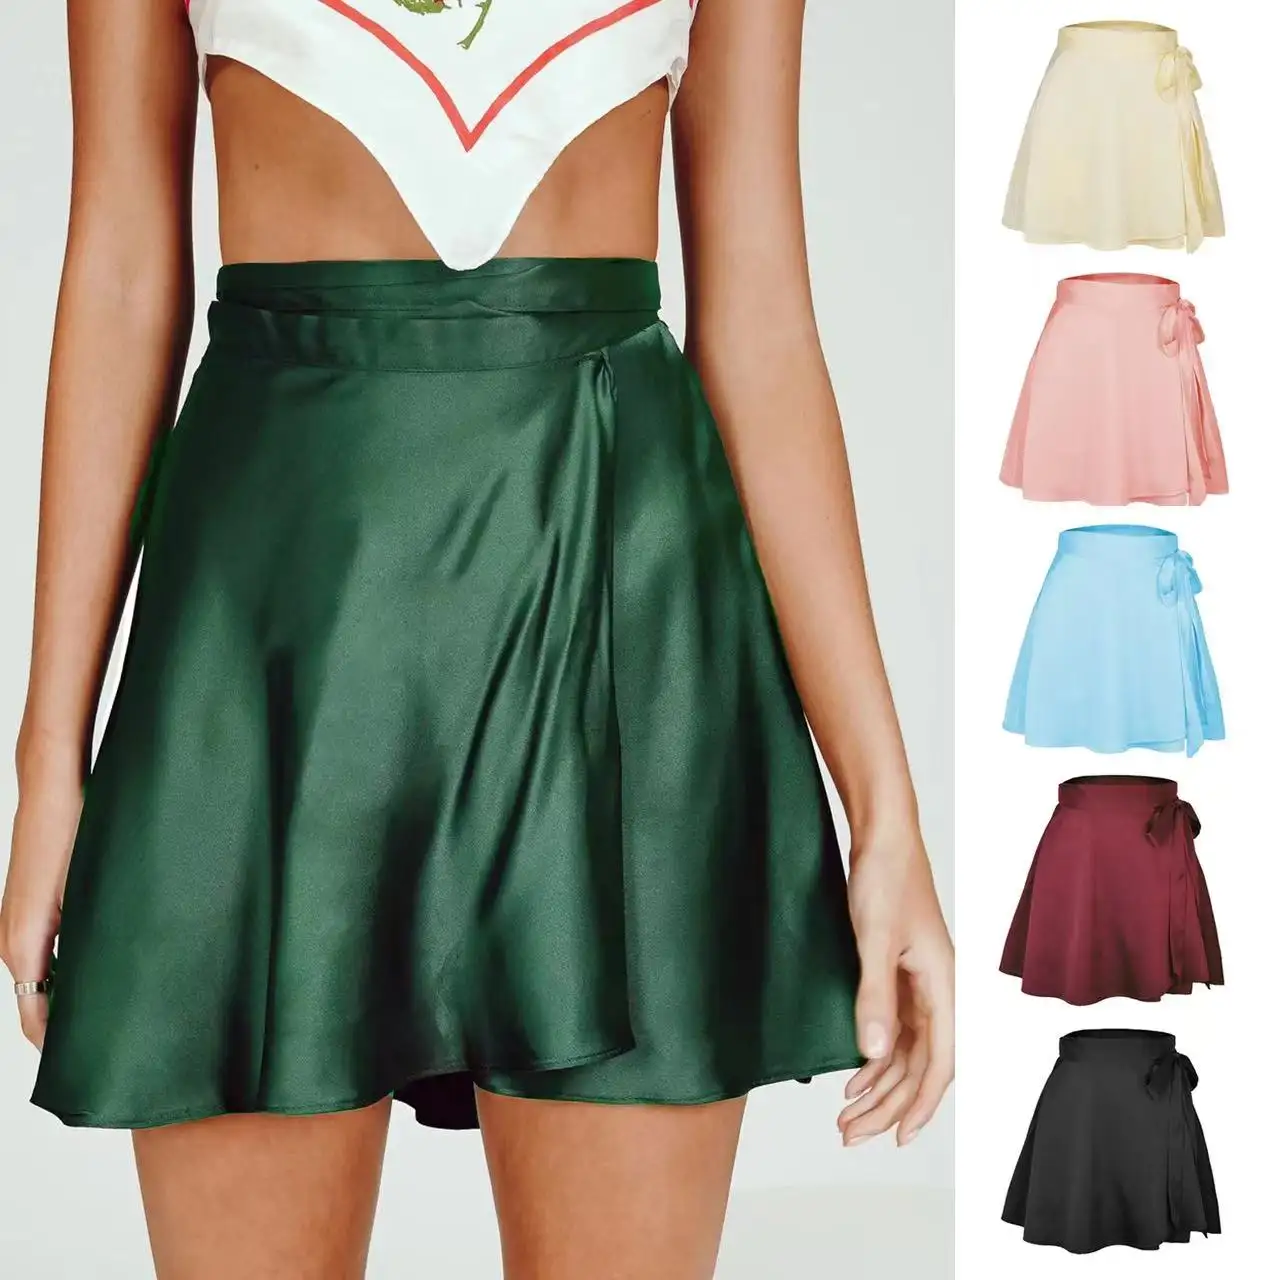 High-waisted Wholesale Solid Color Skirt Fashion One Piece Lace Skirt Chiffon Satin Wrap Shiny Short Skirt